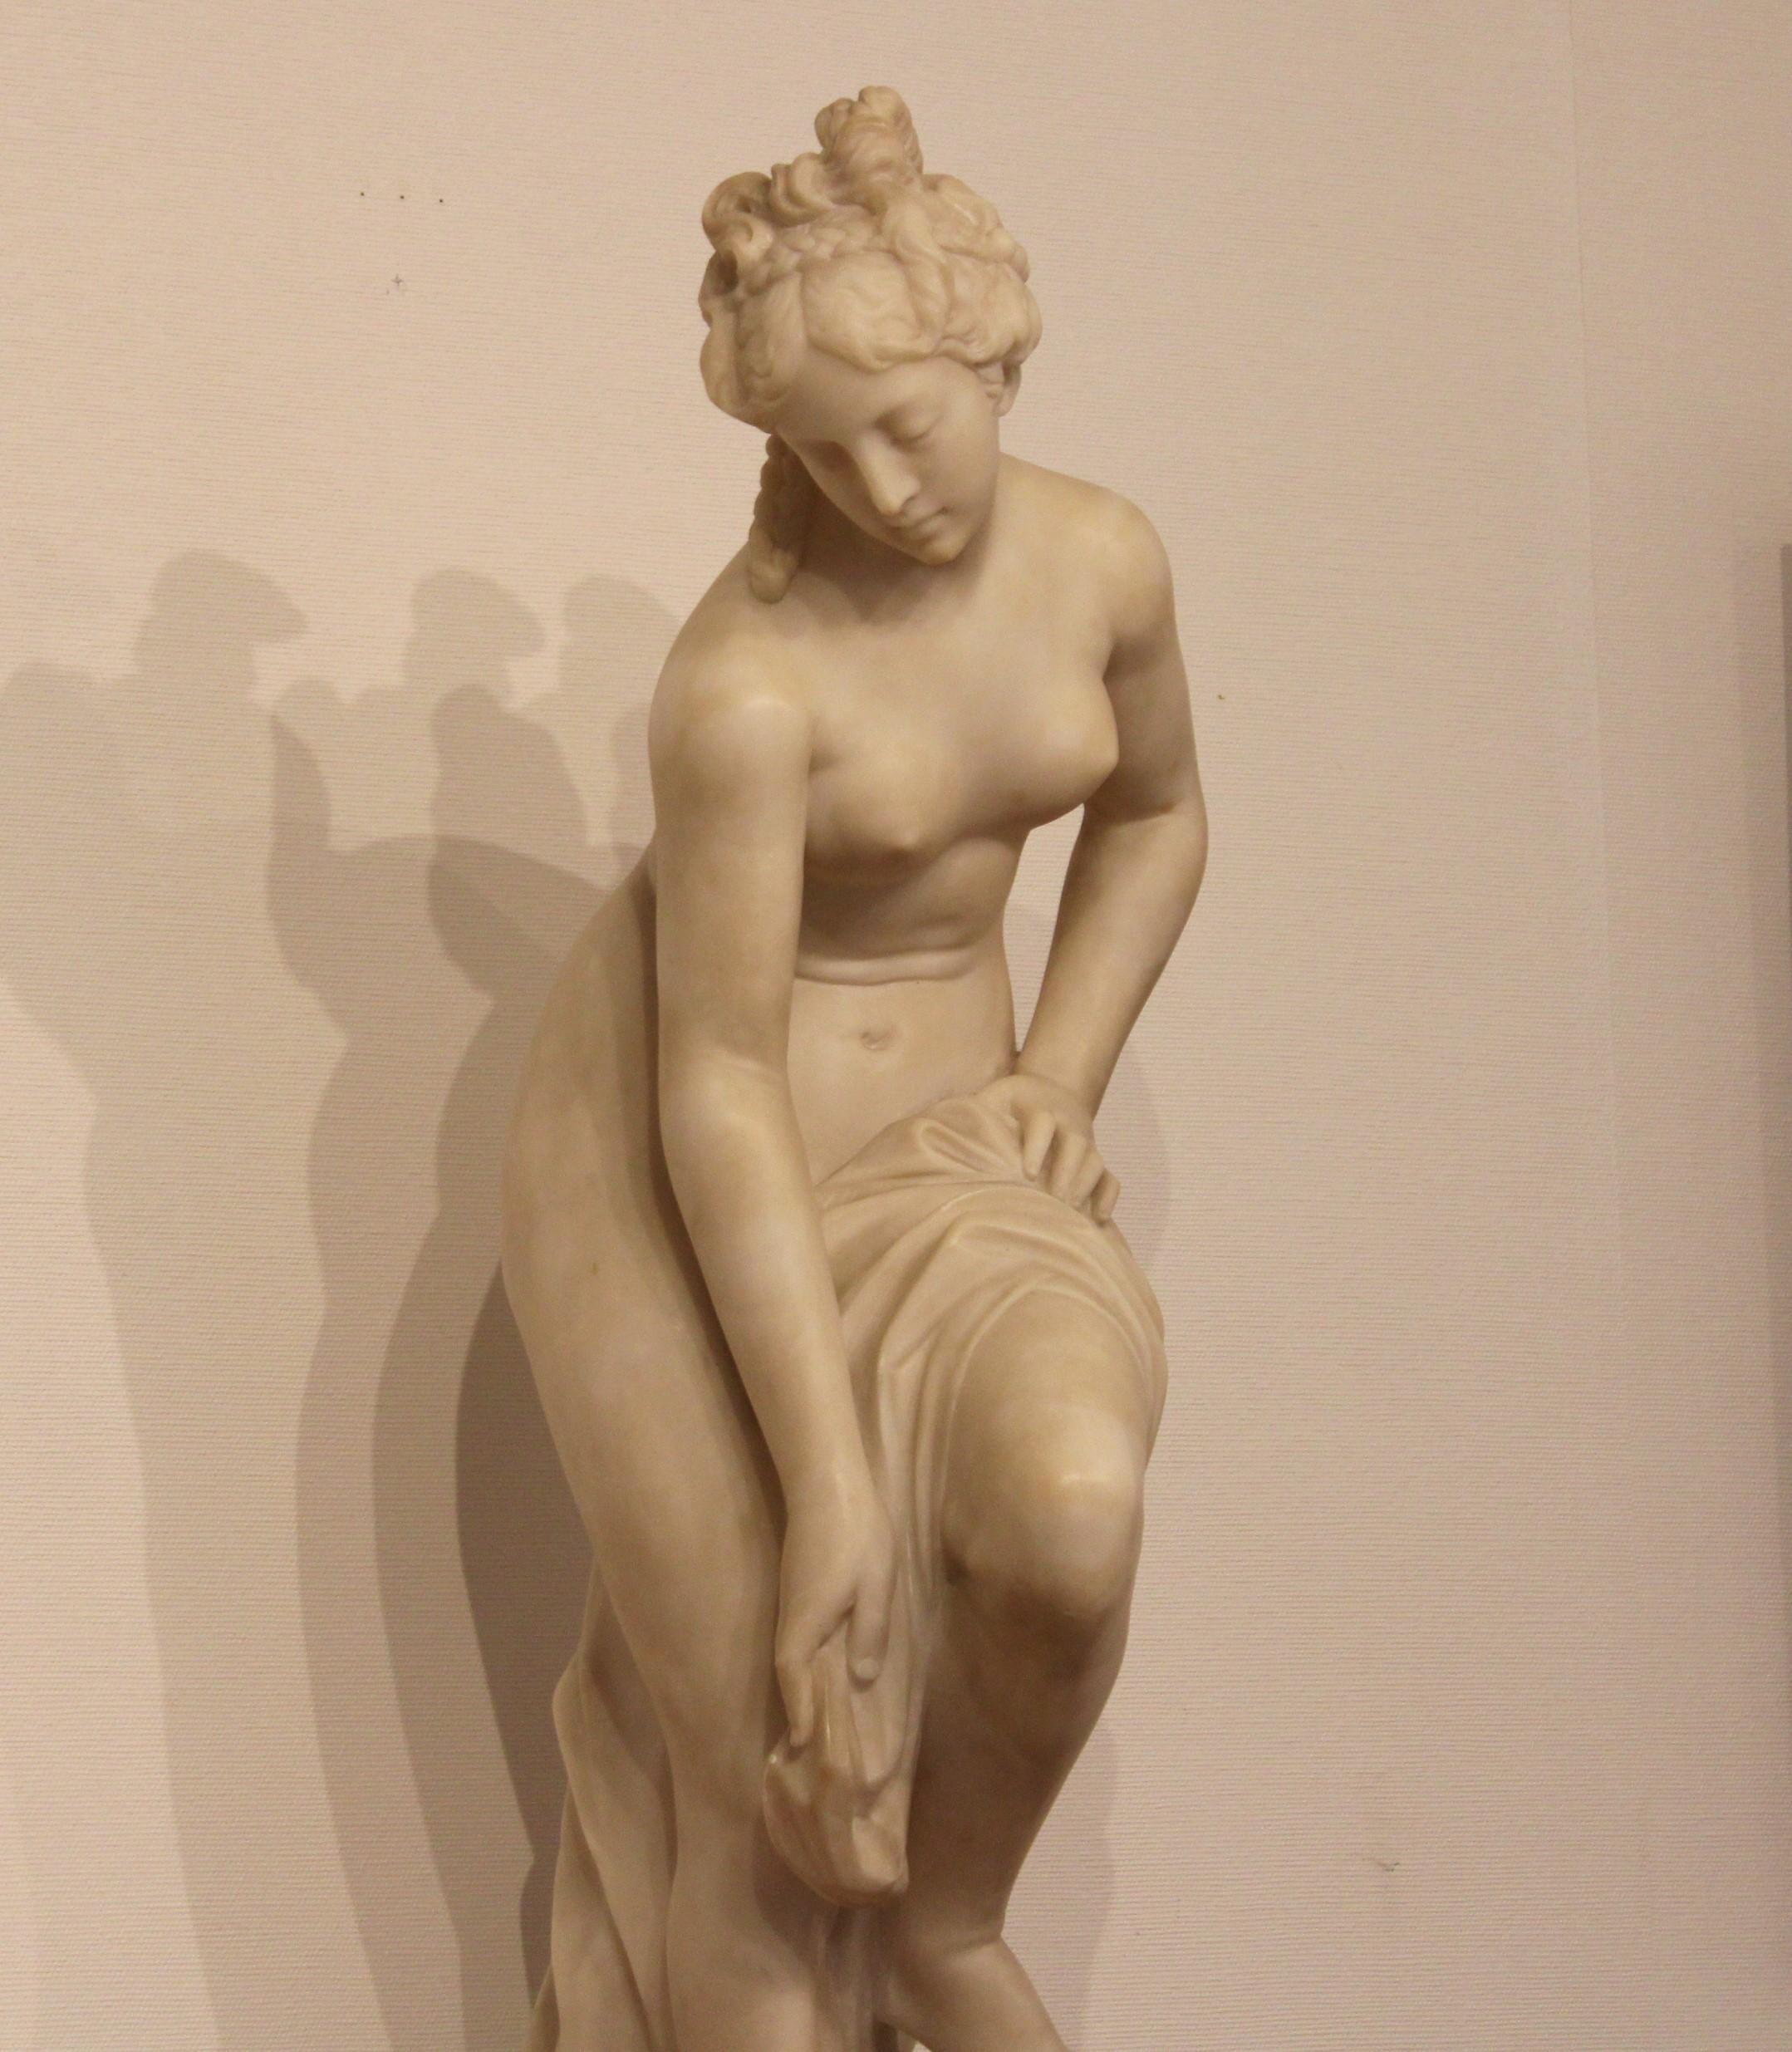 Bather, after Etienne Maurice Falconet (1716-1791)
France, late 19th century